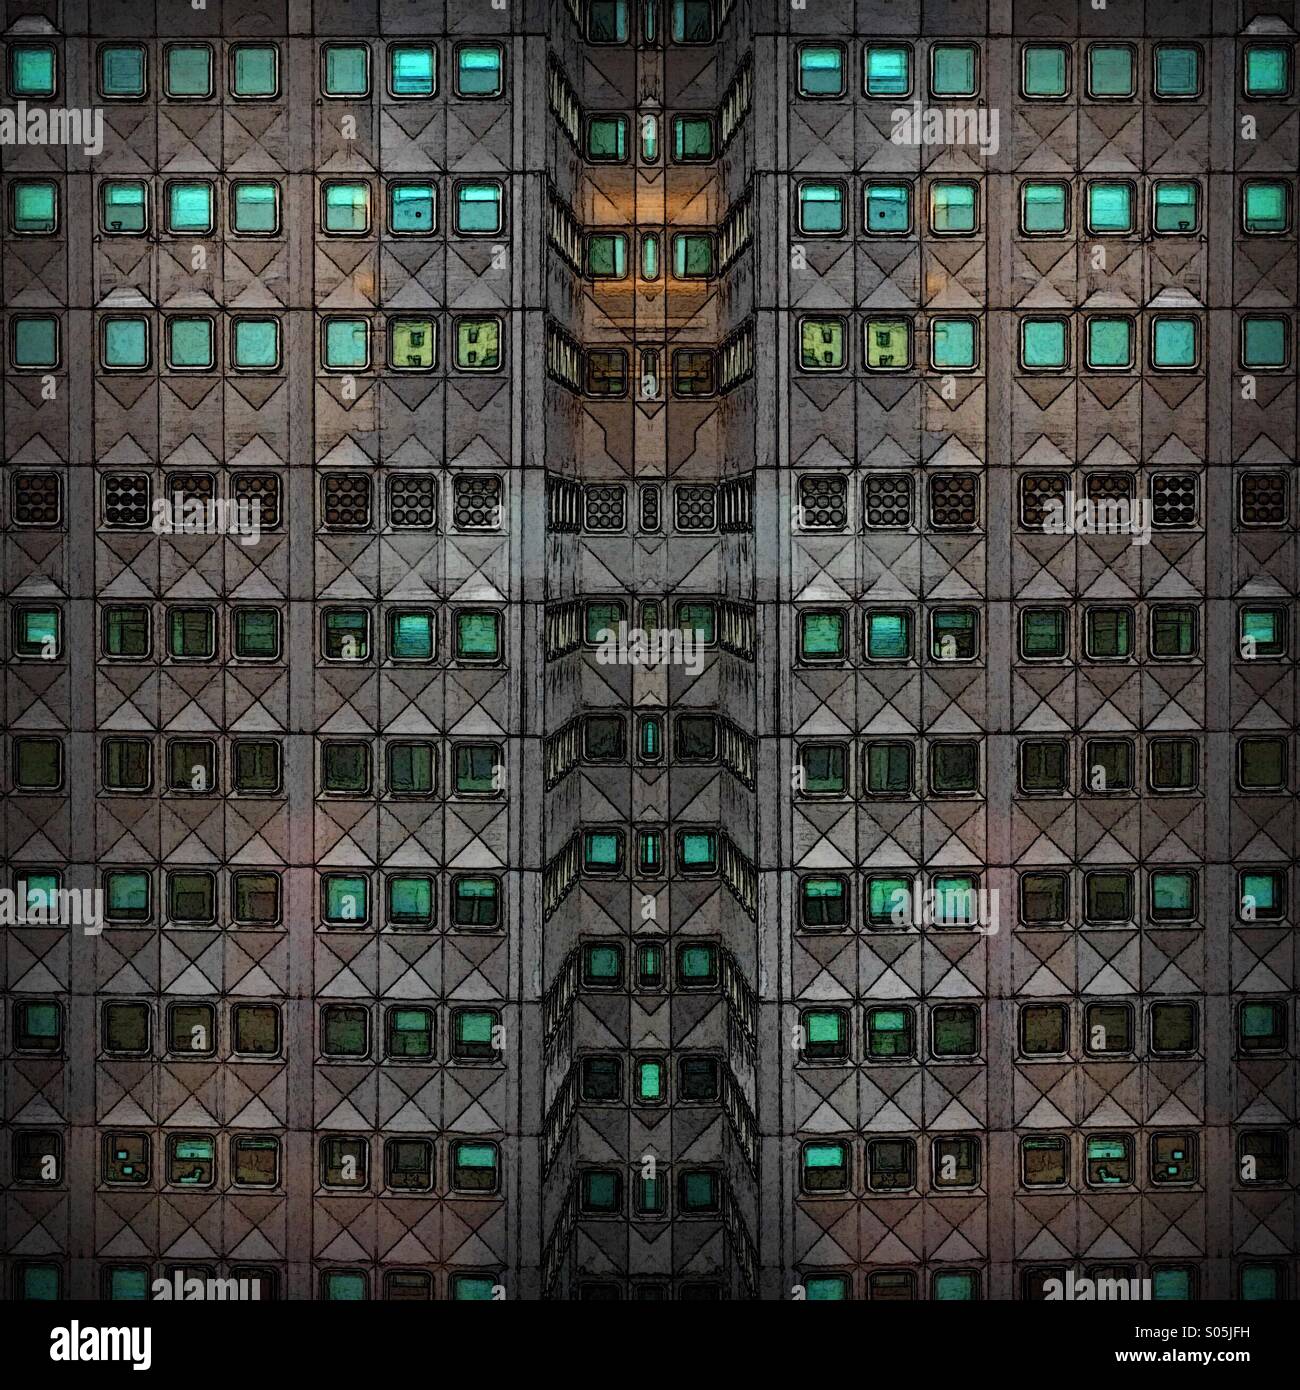 An abstract artistic image created from an image of an office building Stock Photo